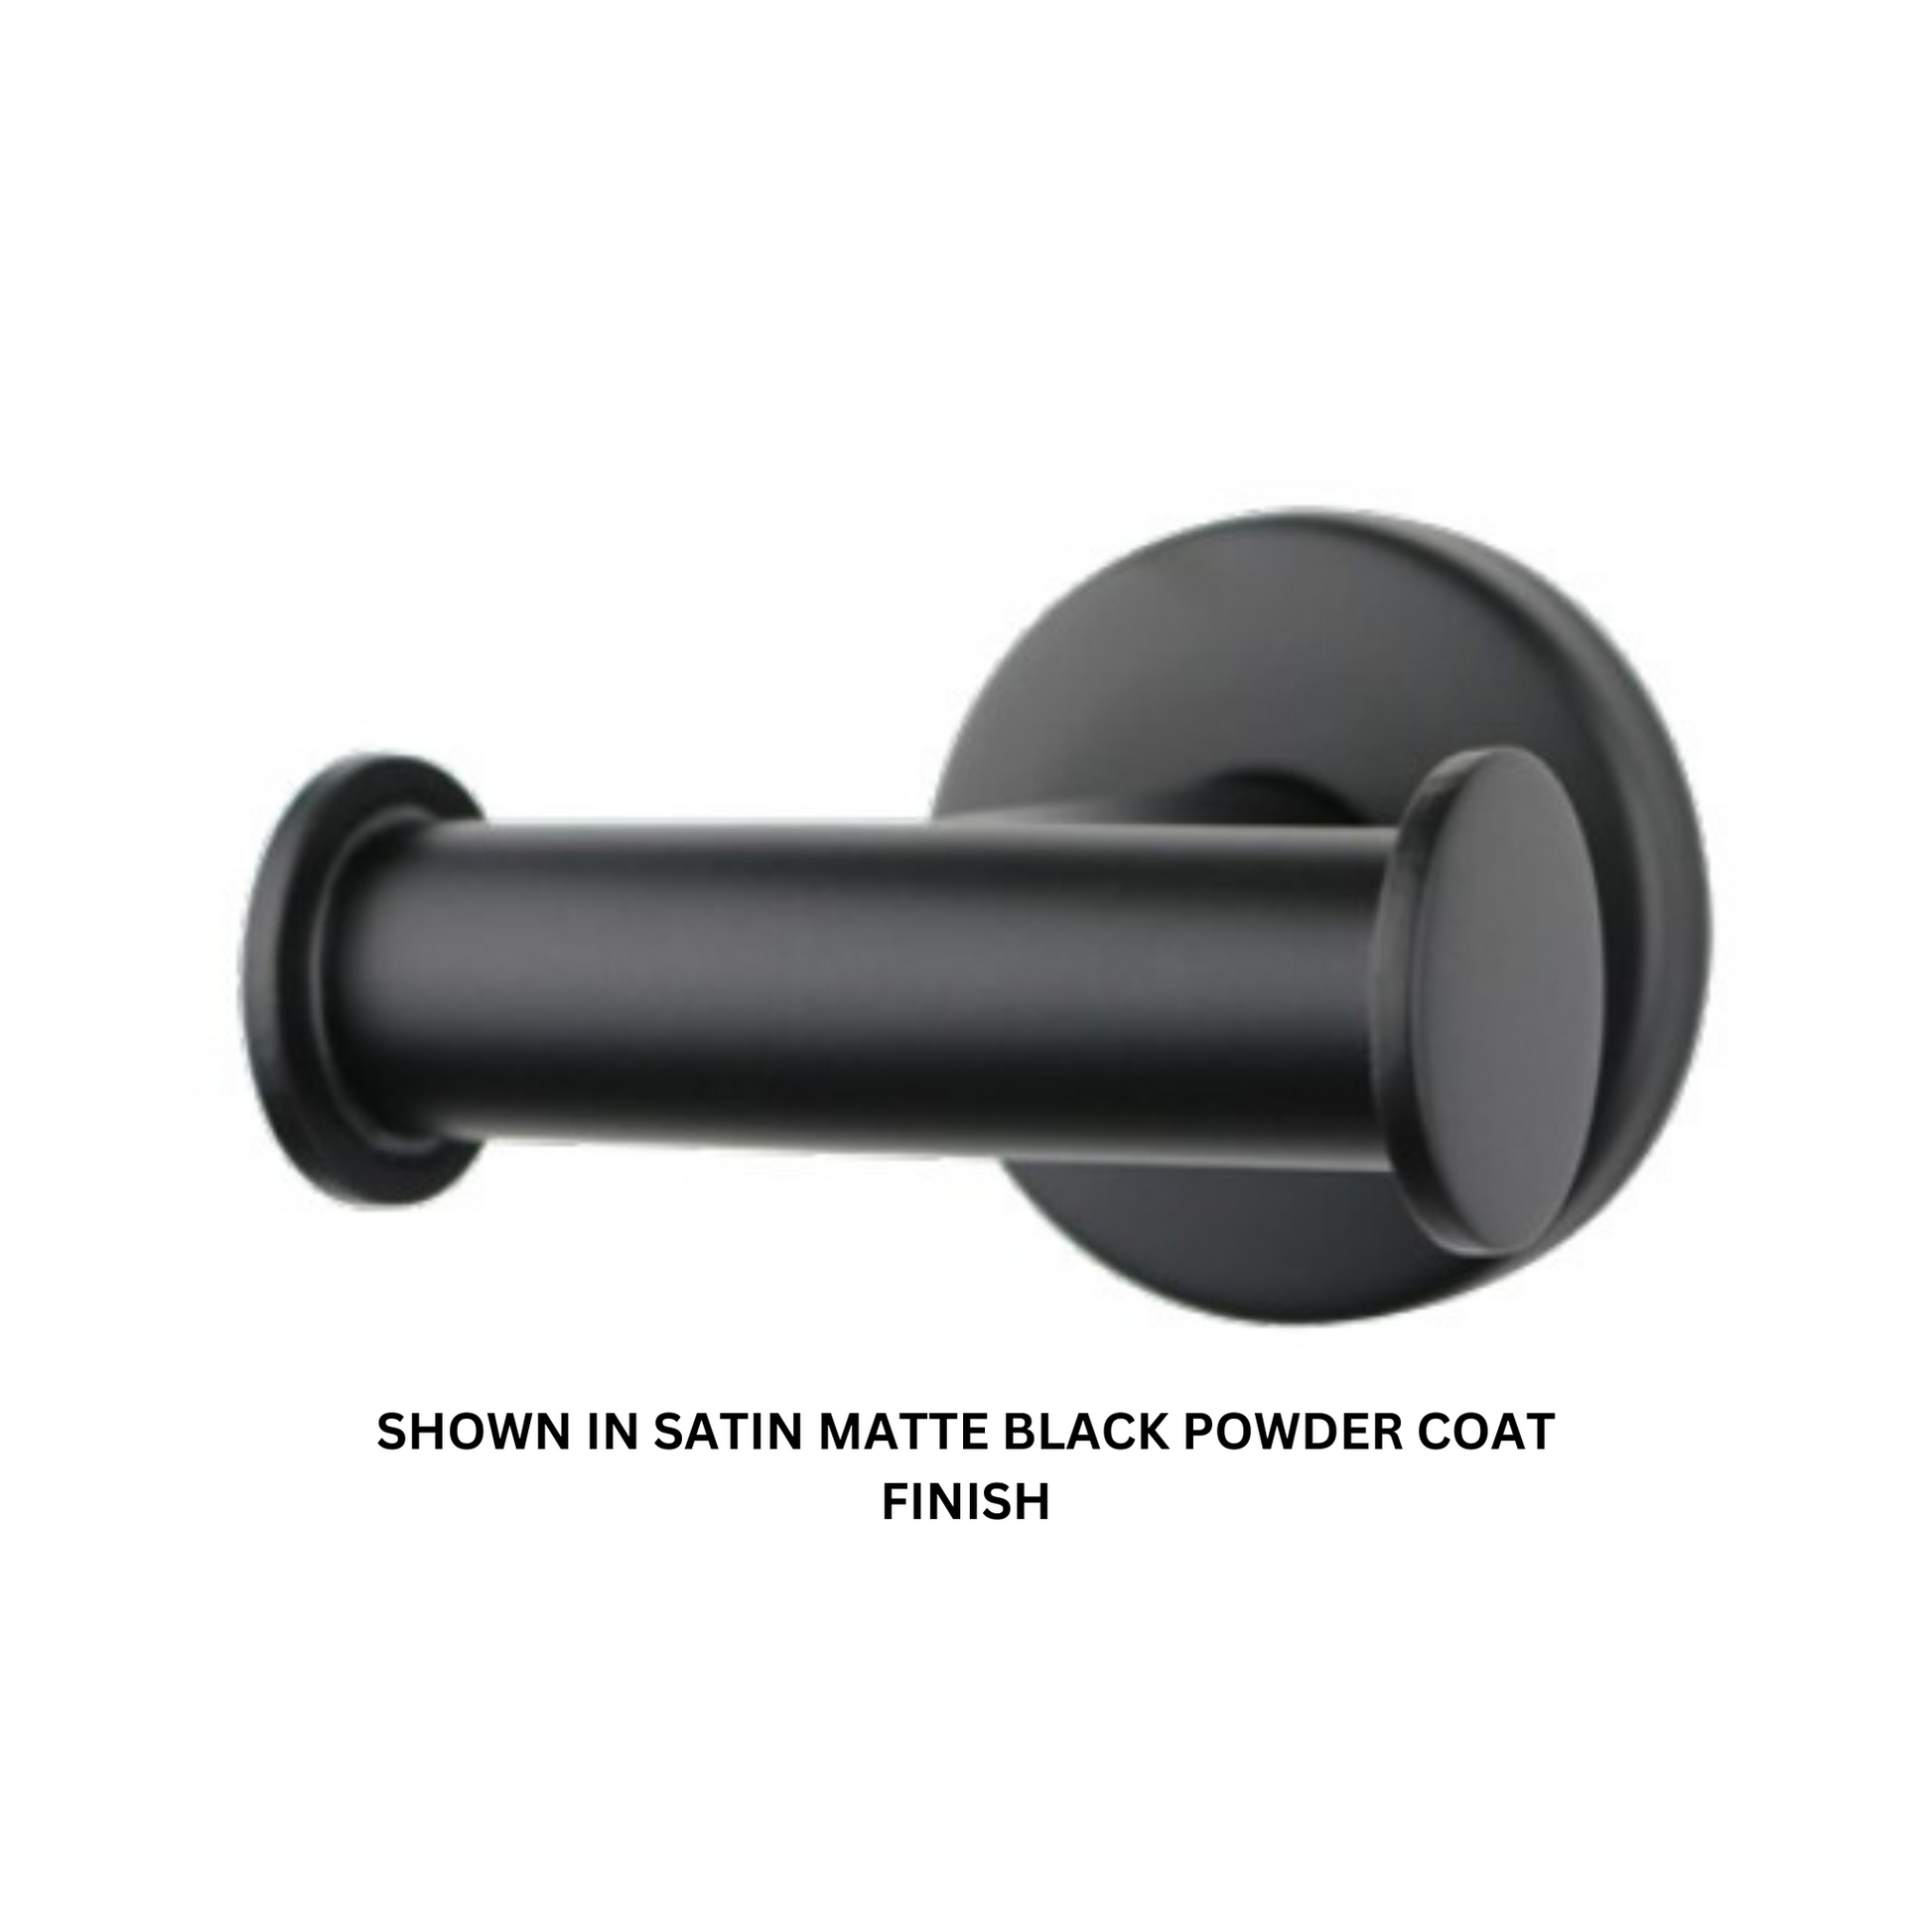 Seachrome Conorado Series 3.5" Bronze Powder Coat Concealed Mounting Flange Double Robe Hook